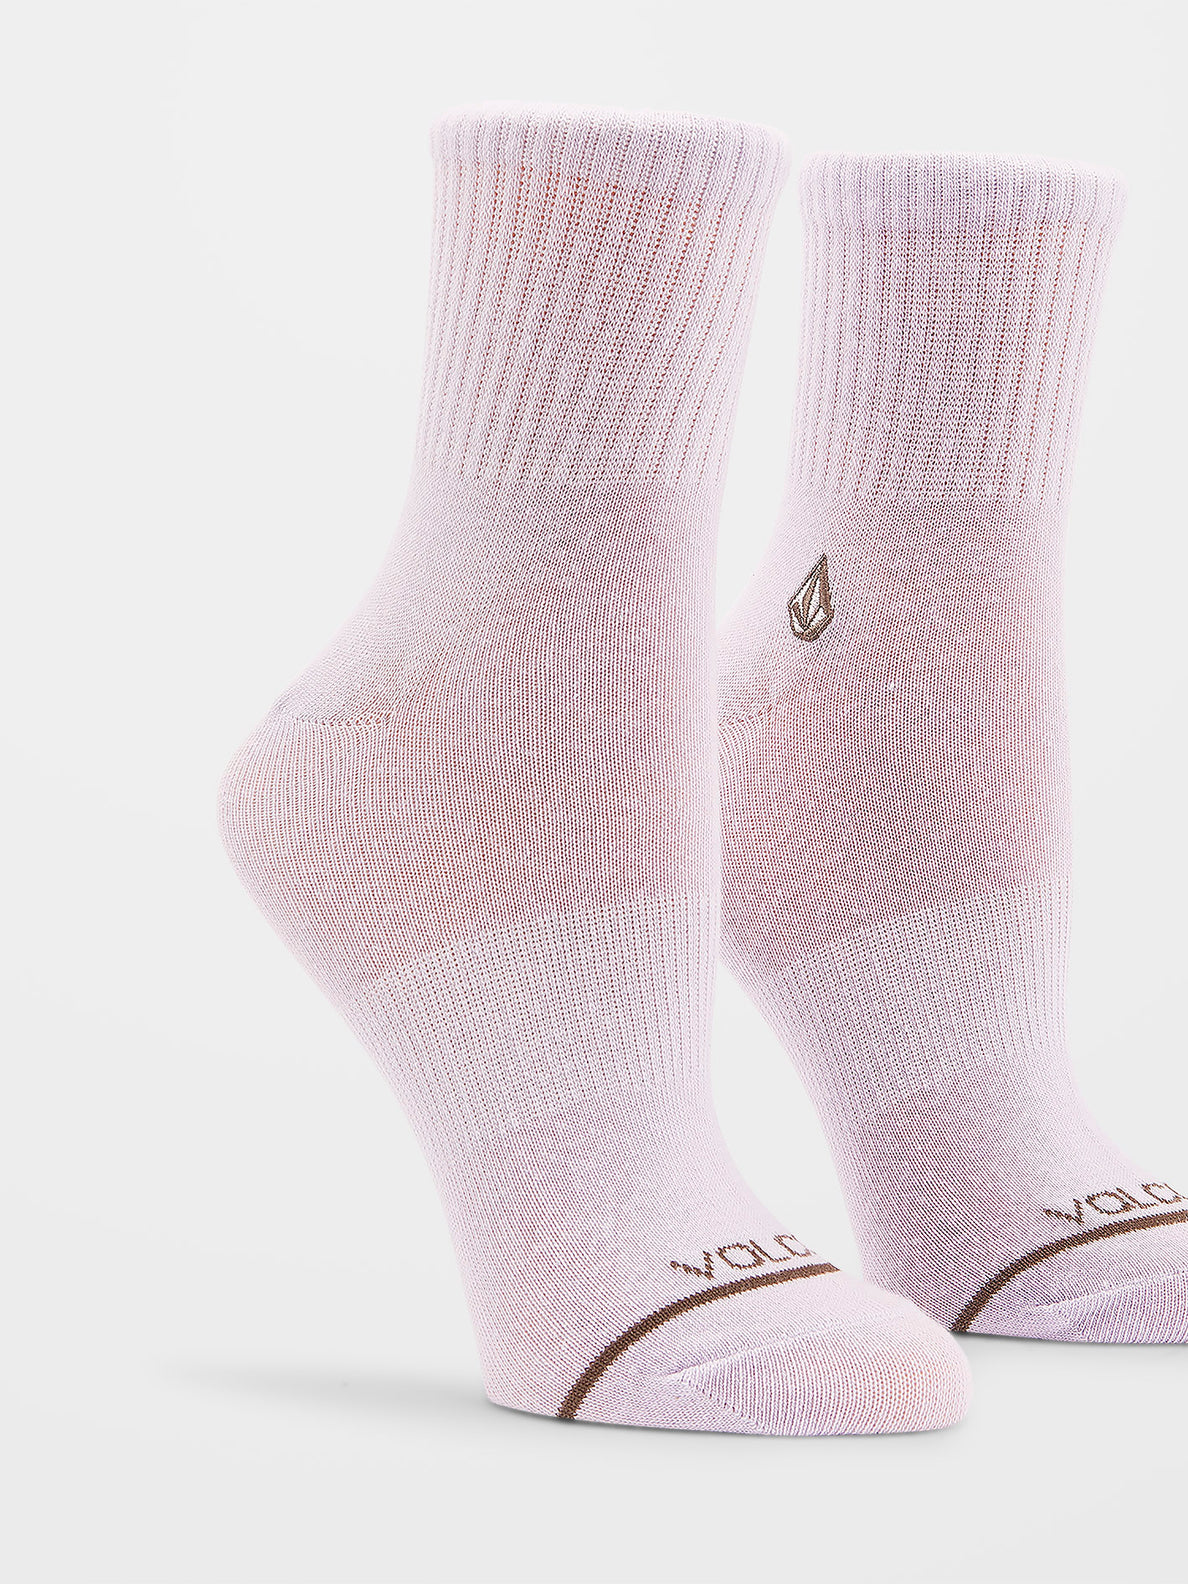 The New Crew Socks (3 pack) - ASSORTED COLORS (E6332200_AST) [6]